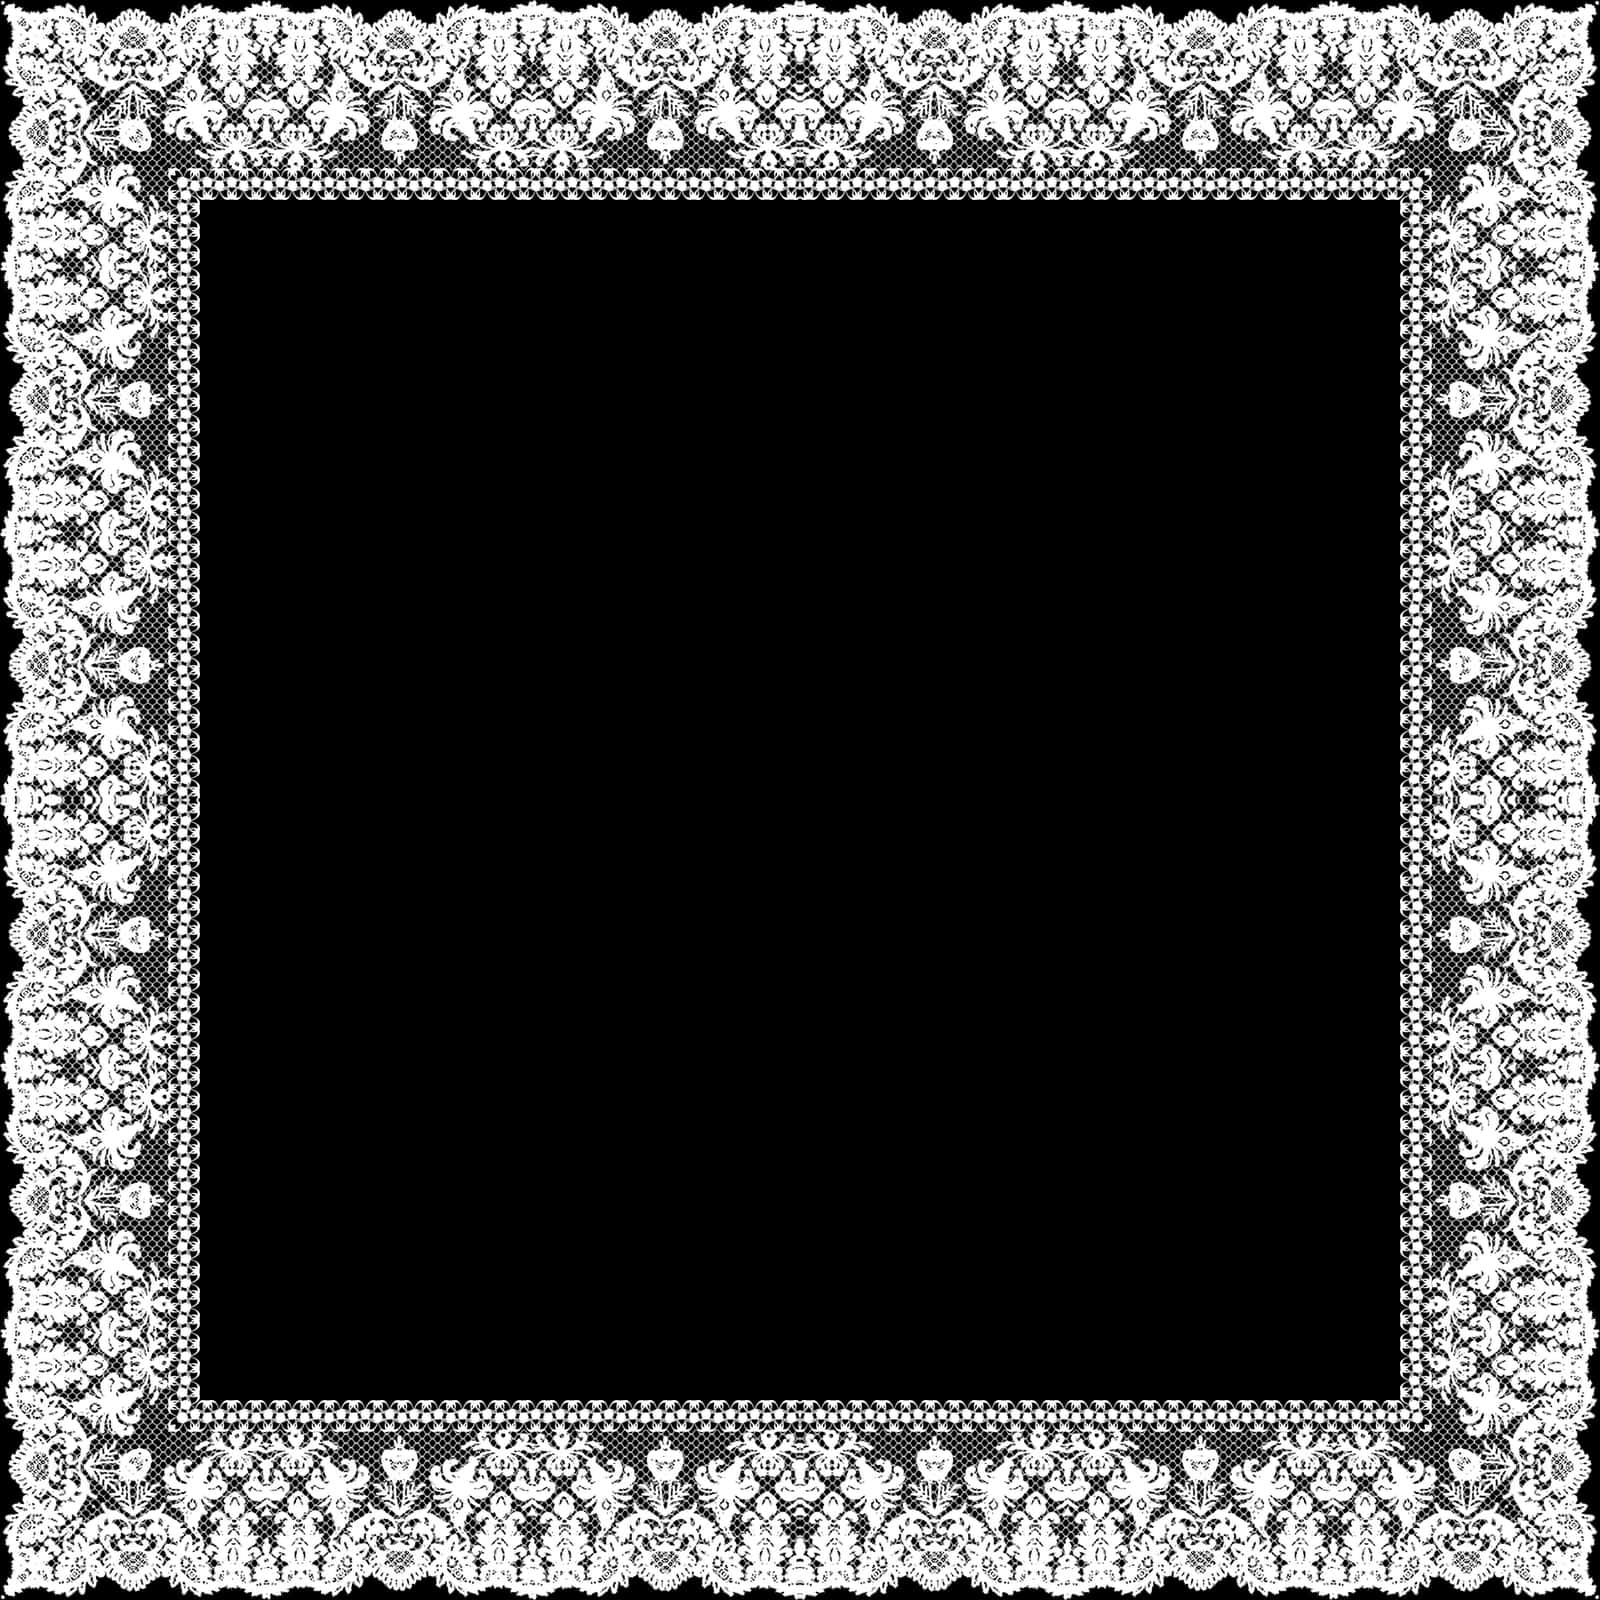 A White Lace Frame With Black Background